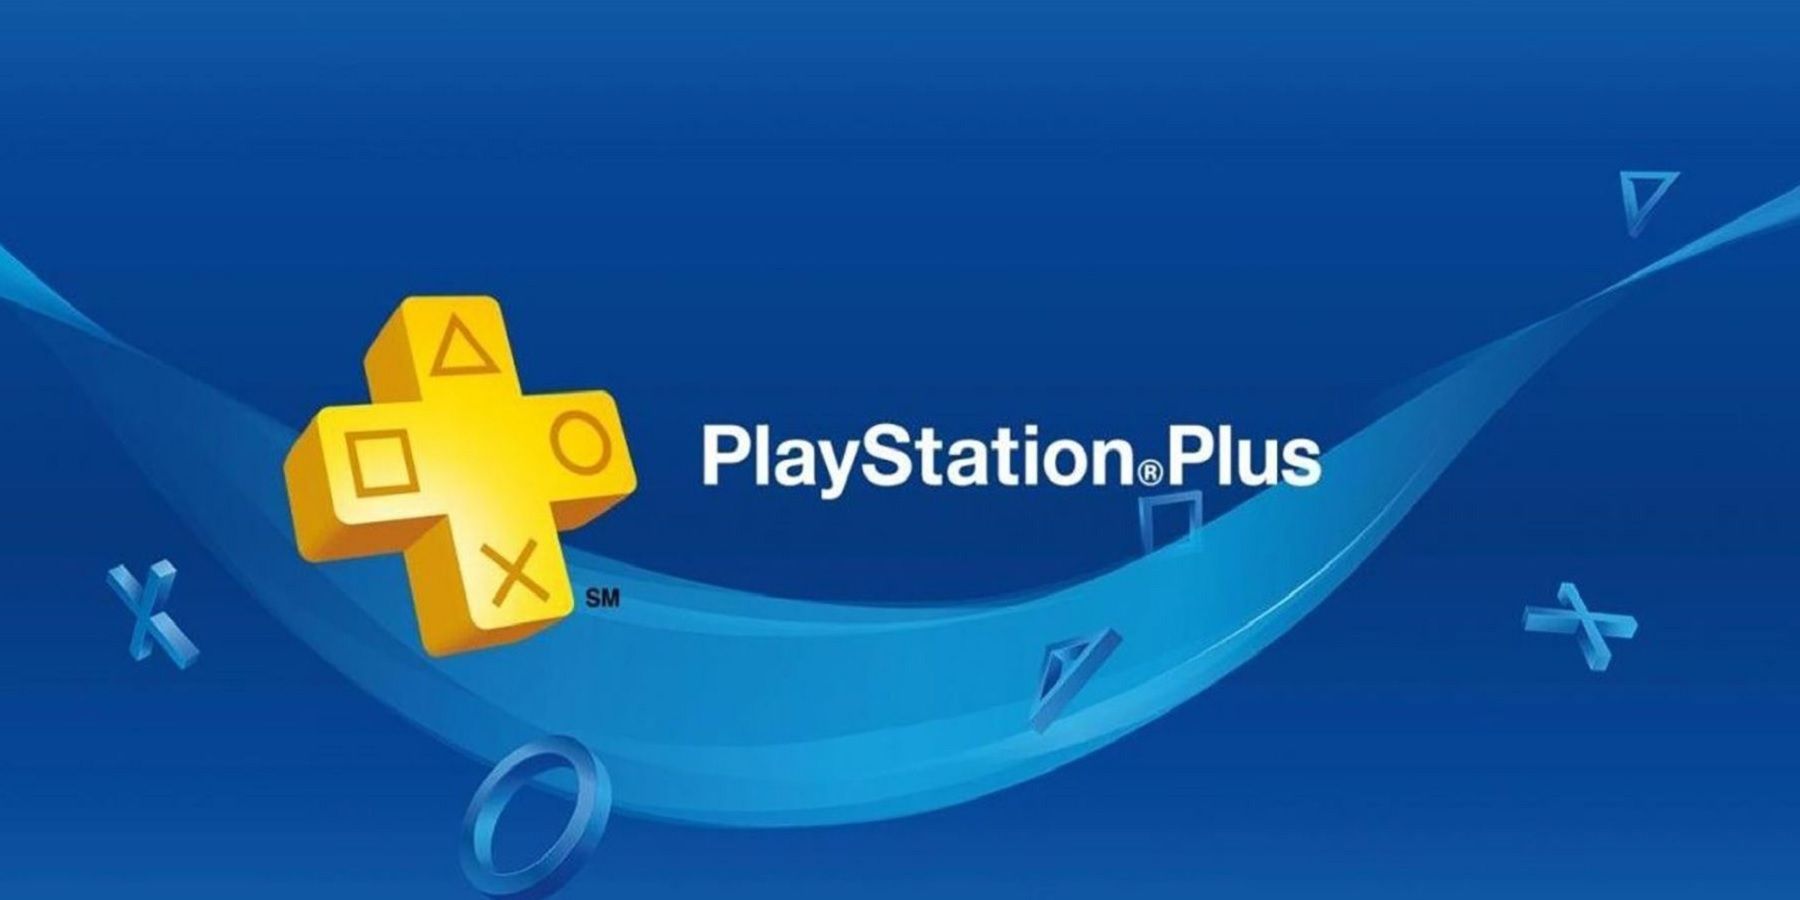 Heres When the Free PS Plus Games for January 2022 Will Likely Be Announced